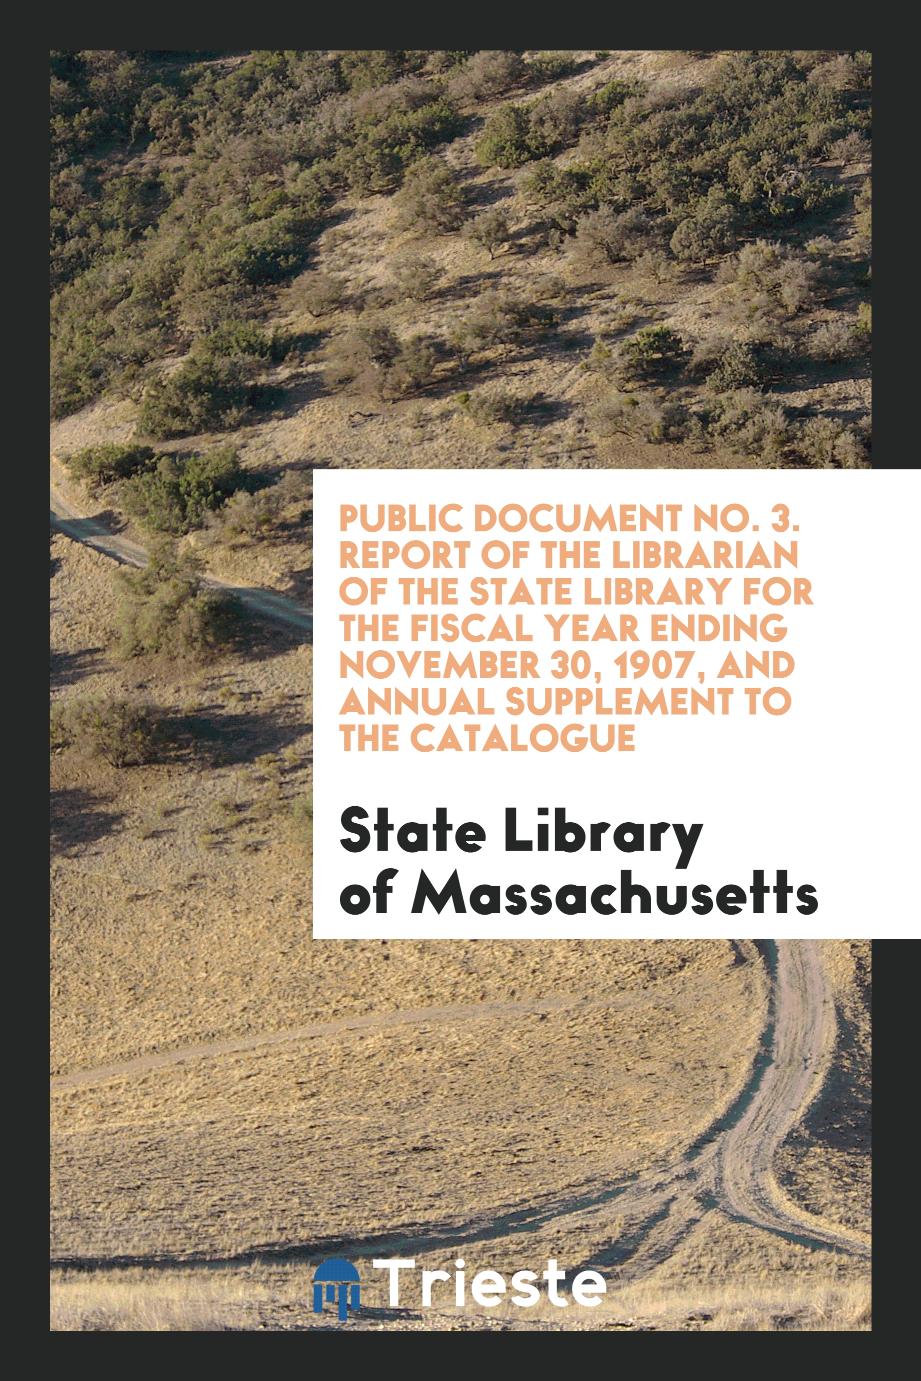 Public Document No. 3. Report of the Librarian of the State Library for the Fiscal Year Ending November 30, 1907, and Annual Supplement to the Catalogue